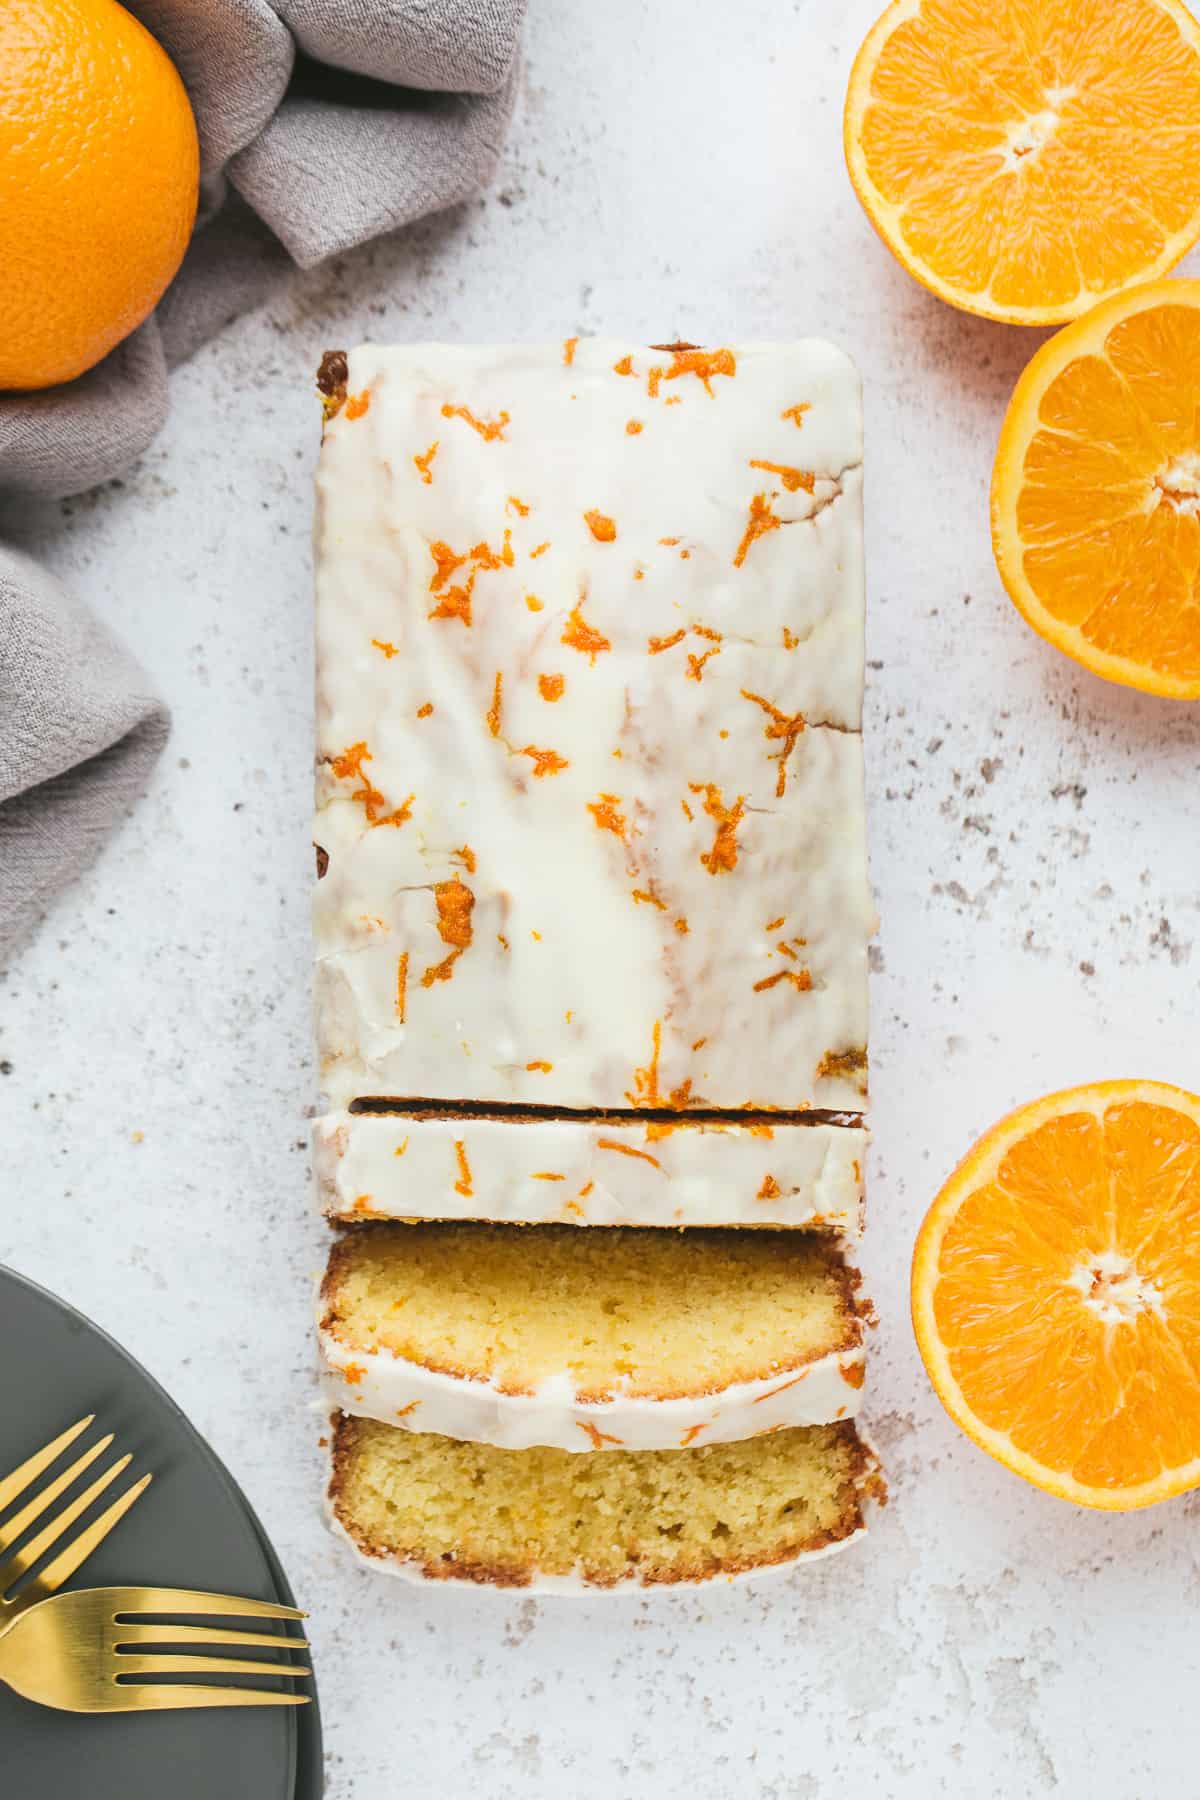 A orange drizzle cake with a white coloured orange flavoured icing on top. 